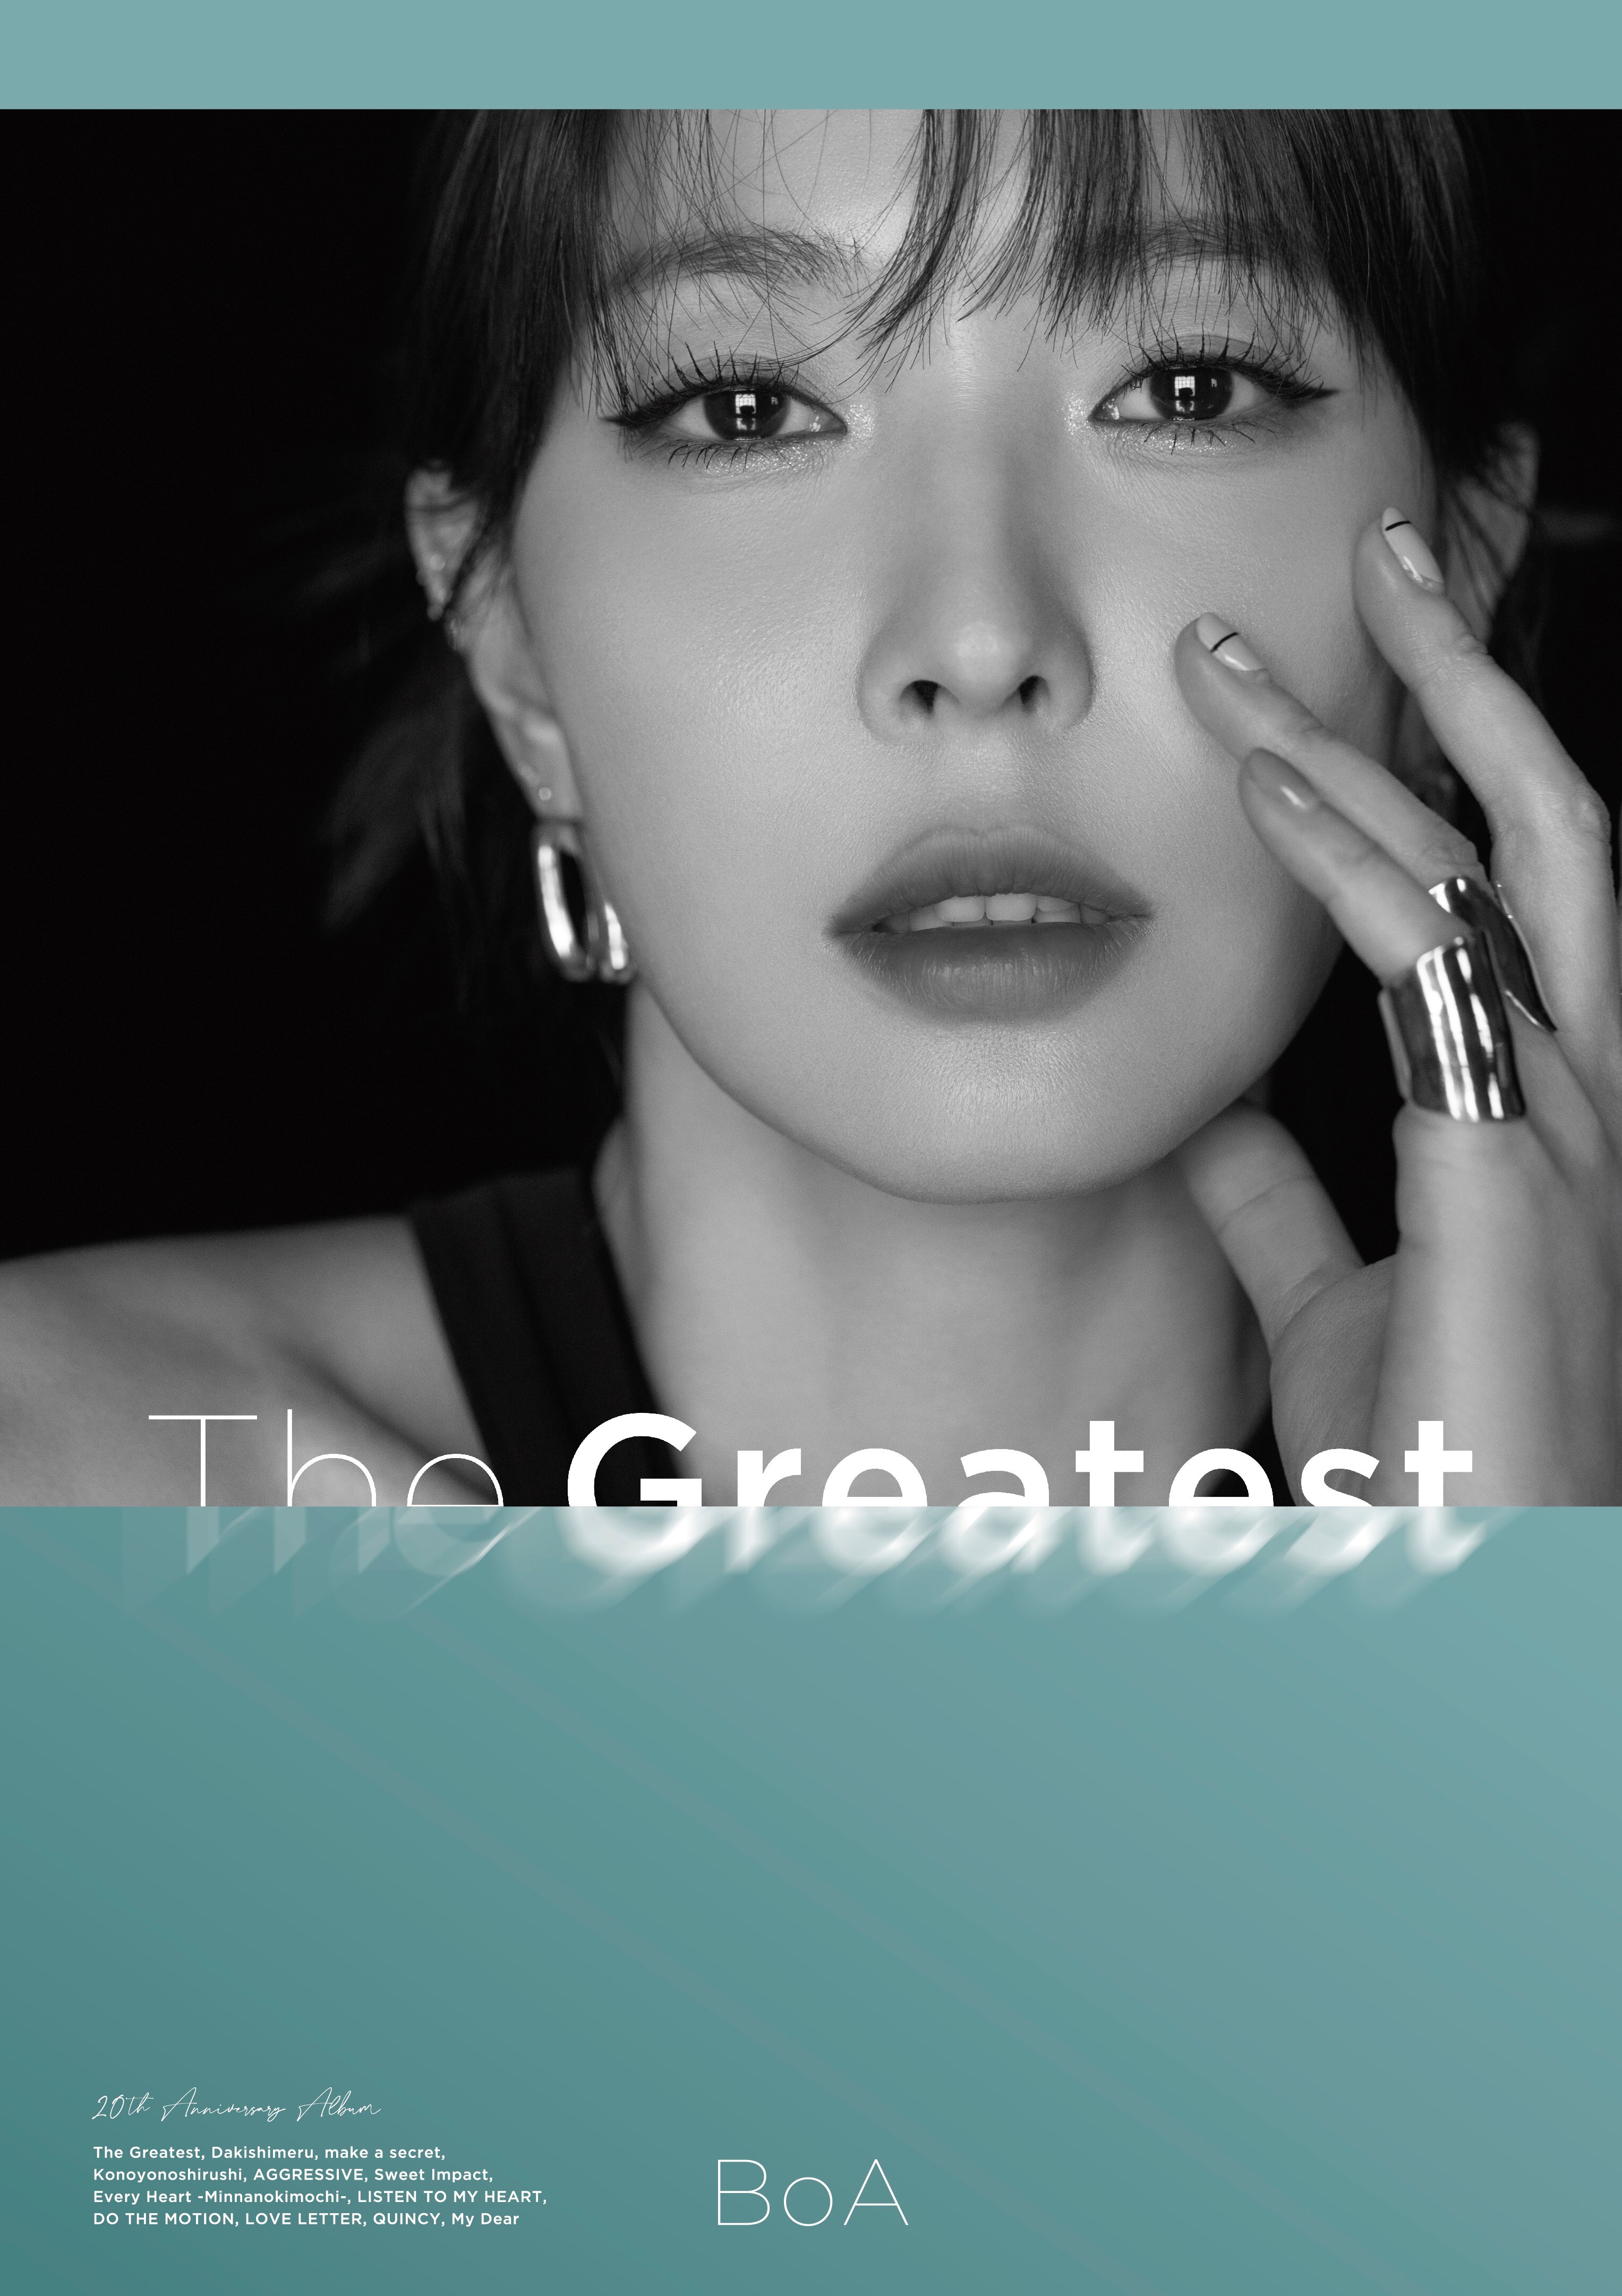 BoA LIVE The Greatest Seat 限定 グッズ アルバム - K-POP/アジア